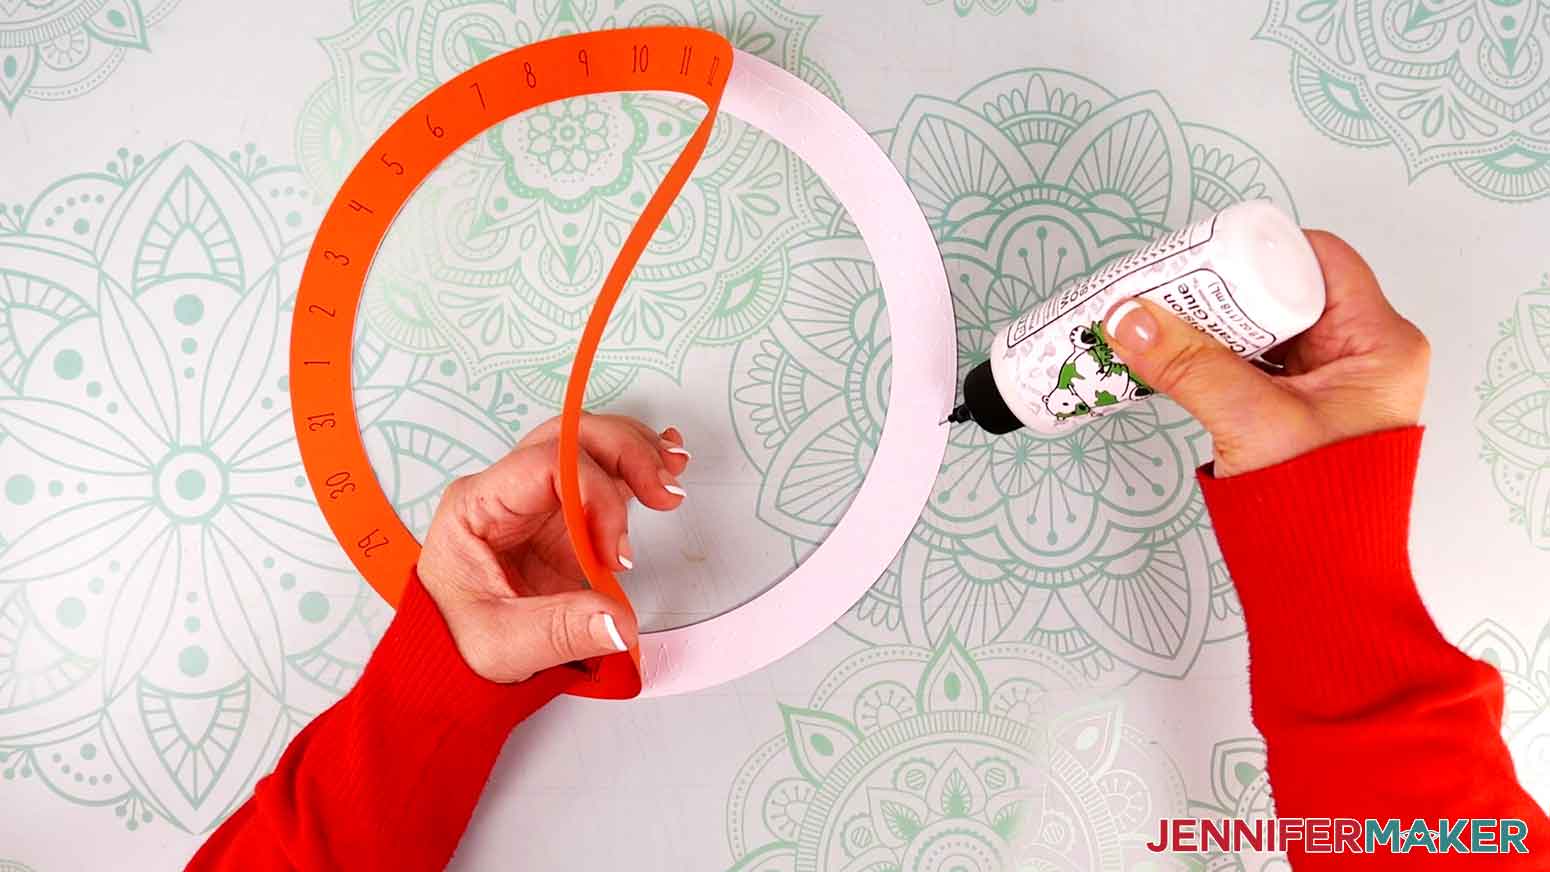 Add glue to the perpetual calendar's large outer wheel in order to attach the cardstock layer on top